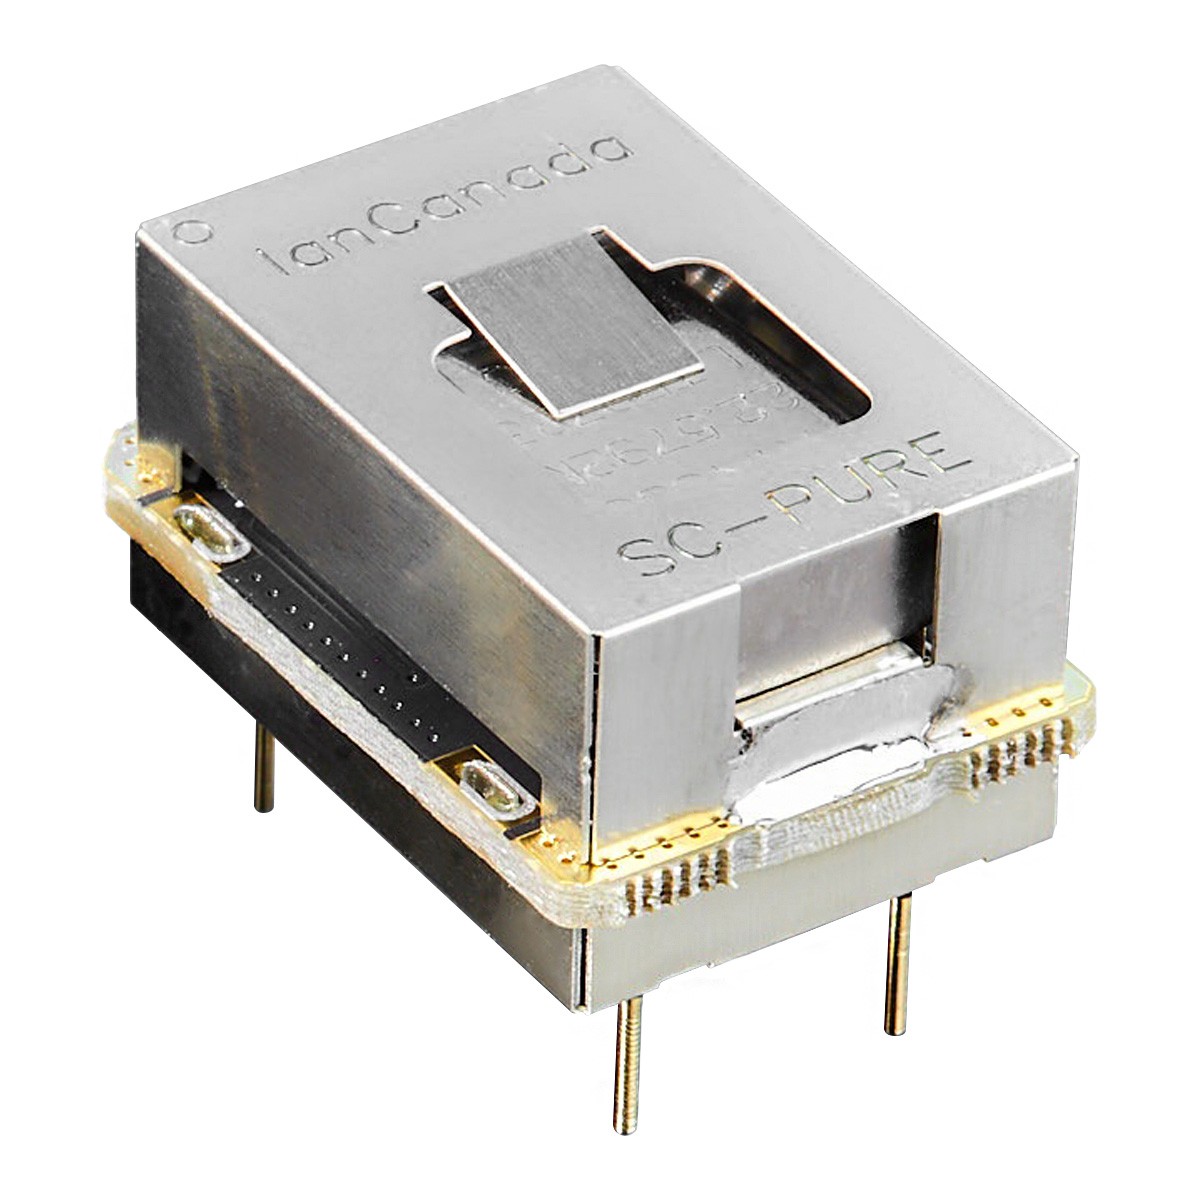 IAN CANADA SC-PURE Femtosecond Clock Ultra-Low Phase Noise 45.1584MHz